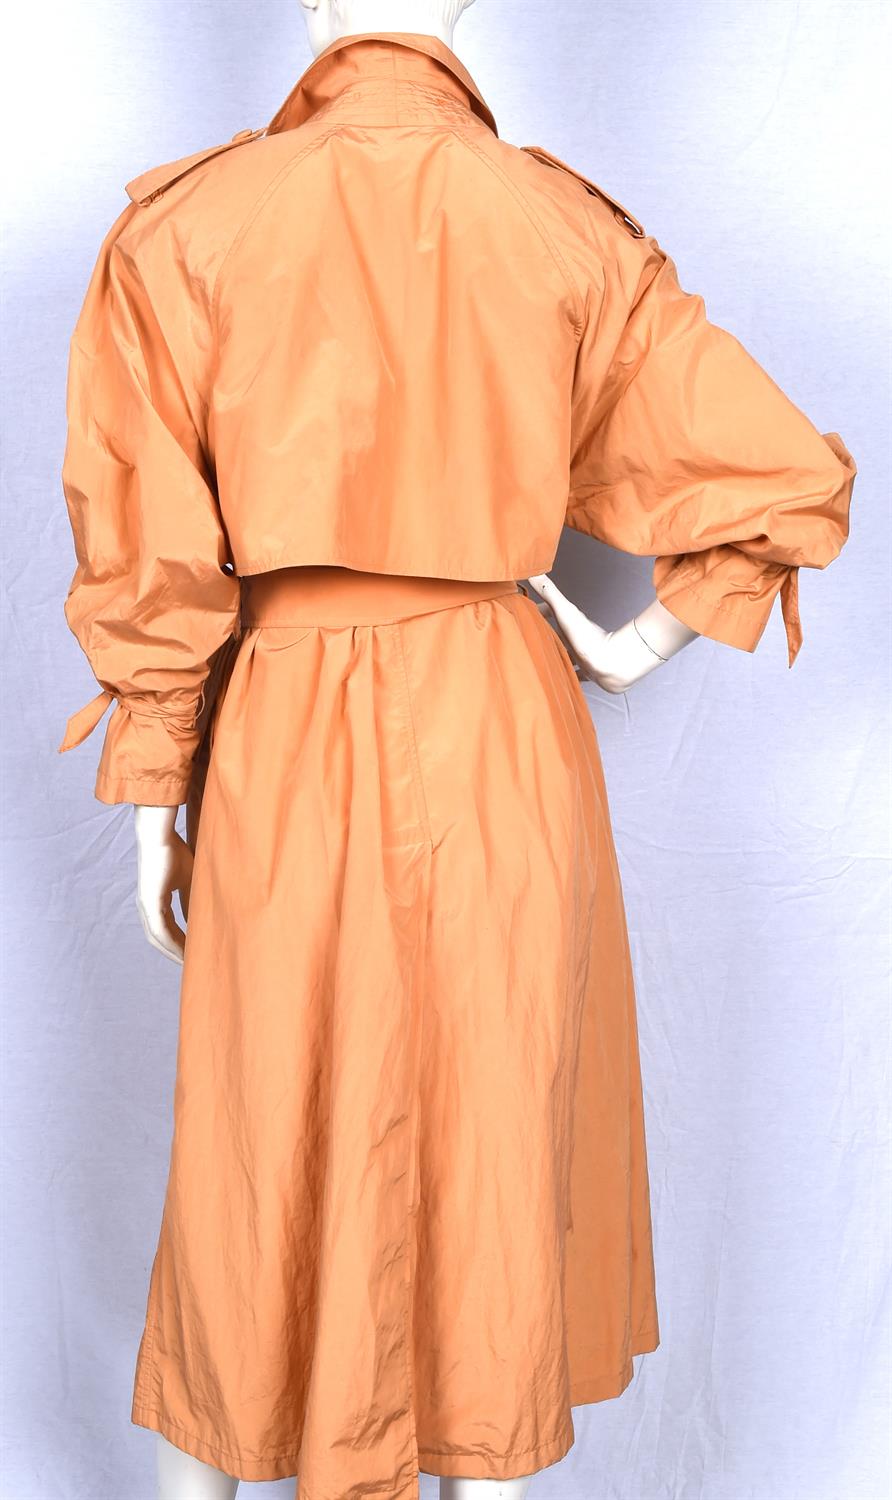 BURBERRYS a ladies vintage 80s/90s iridescent tangerine-coloured cotton and nylon trench coat UK 10 - Image 5 of 9